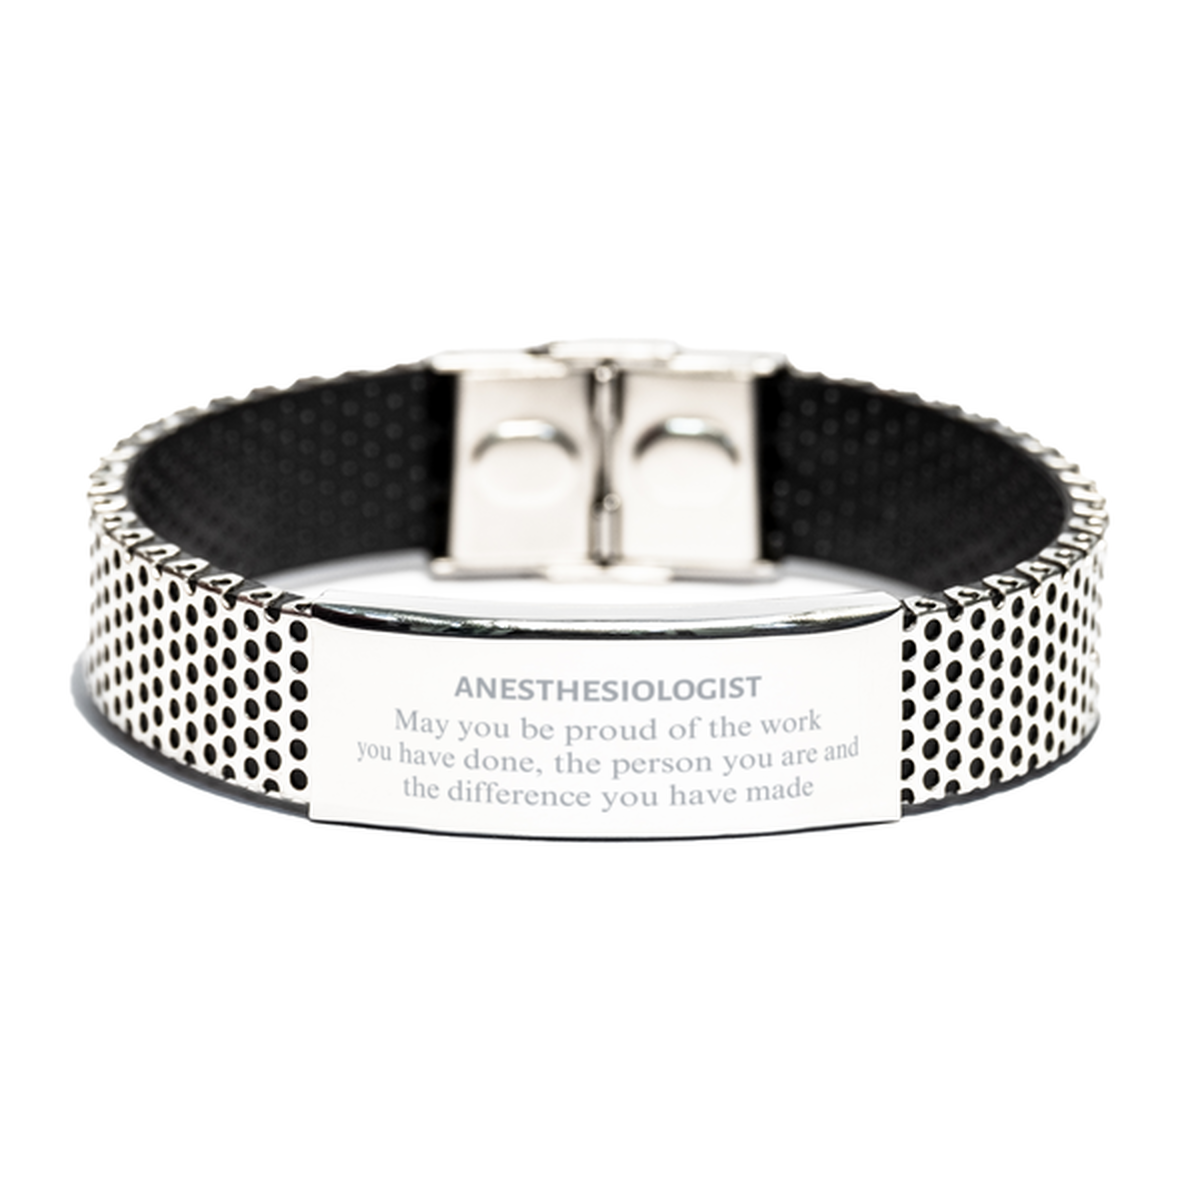 Anesthesiologist May you be proud of the work you have done, Retirement Anesthesiologist Stainless Steel Bracelet for Colleague Appreciation Gifts Amazing for Anesthesiologist